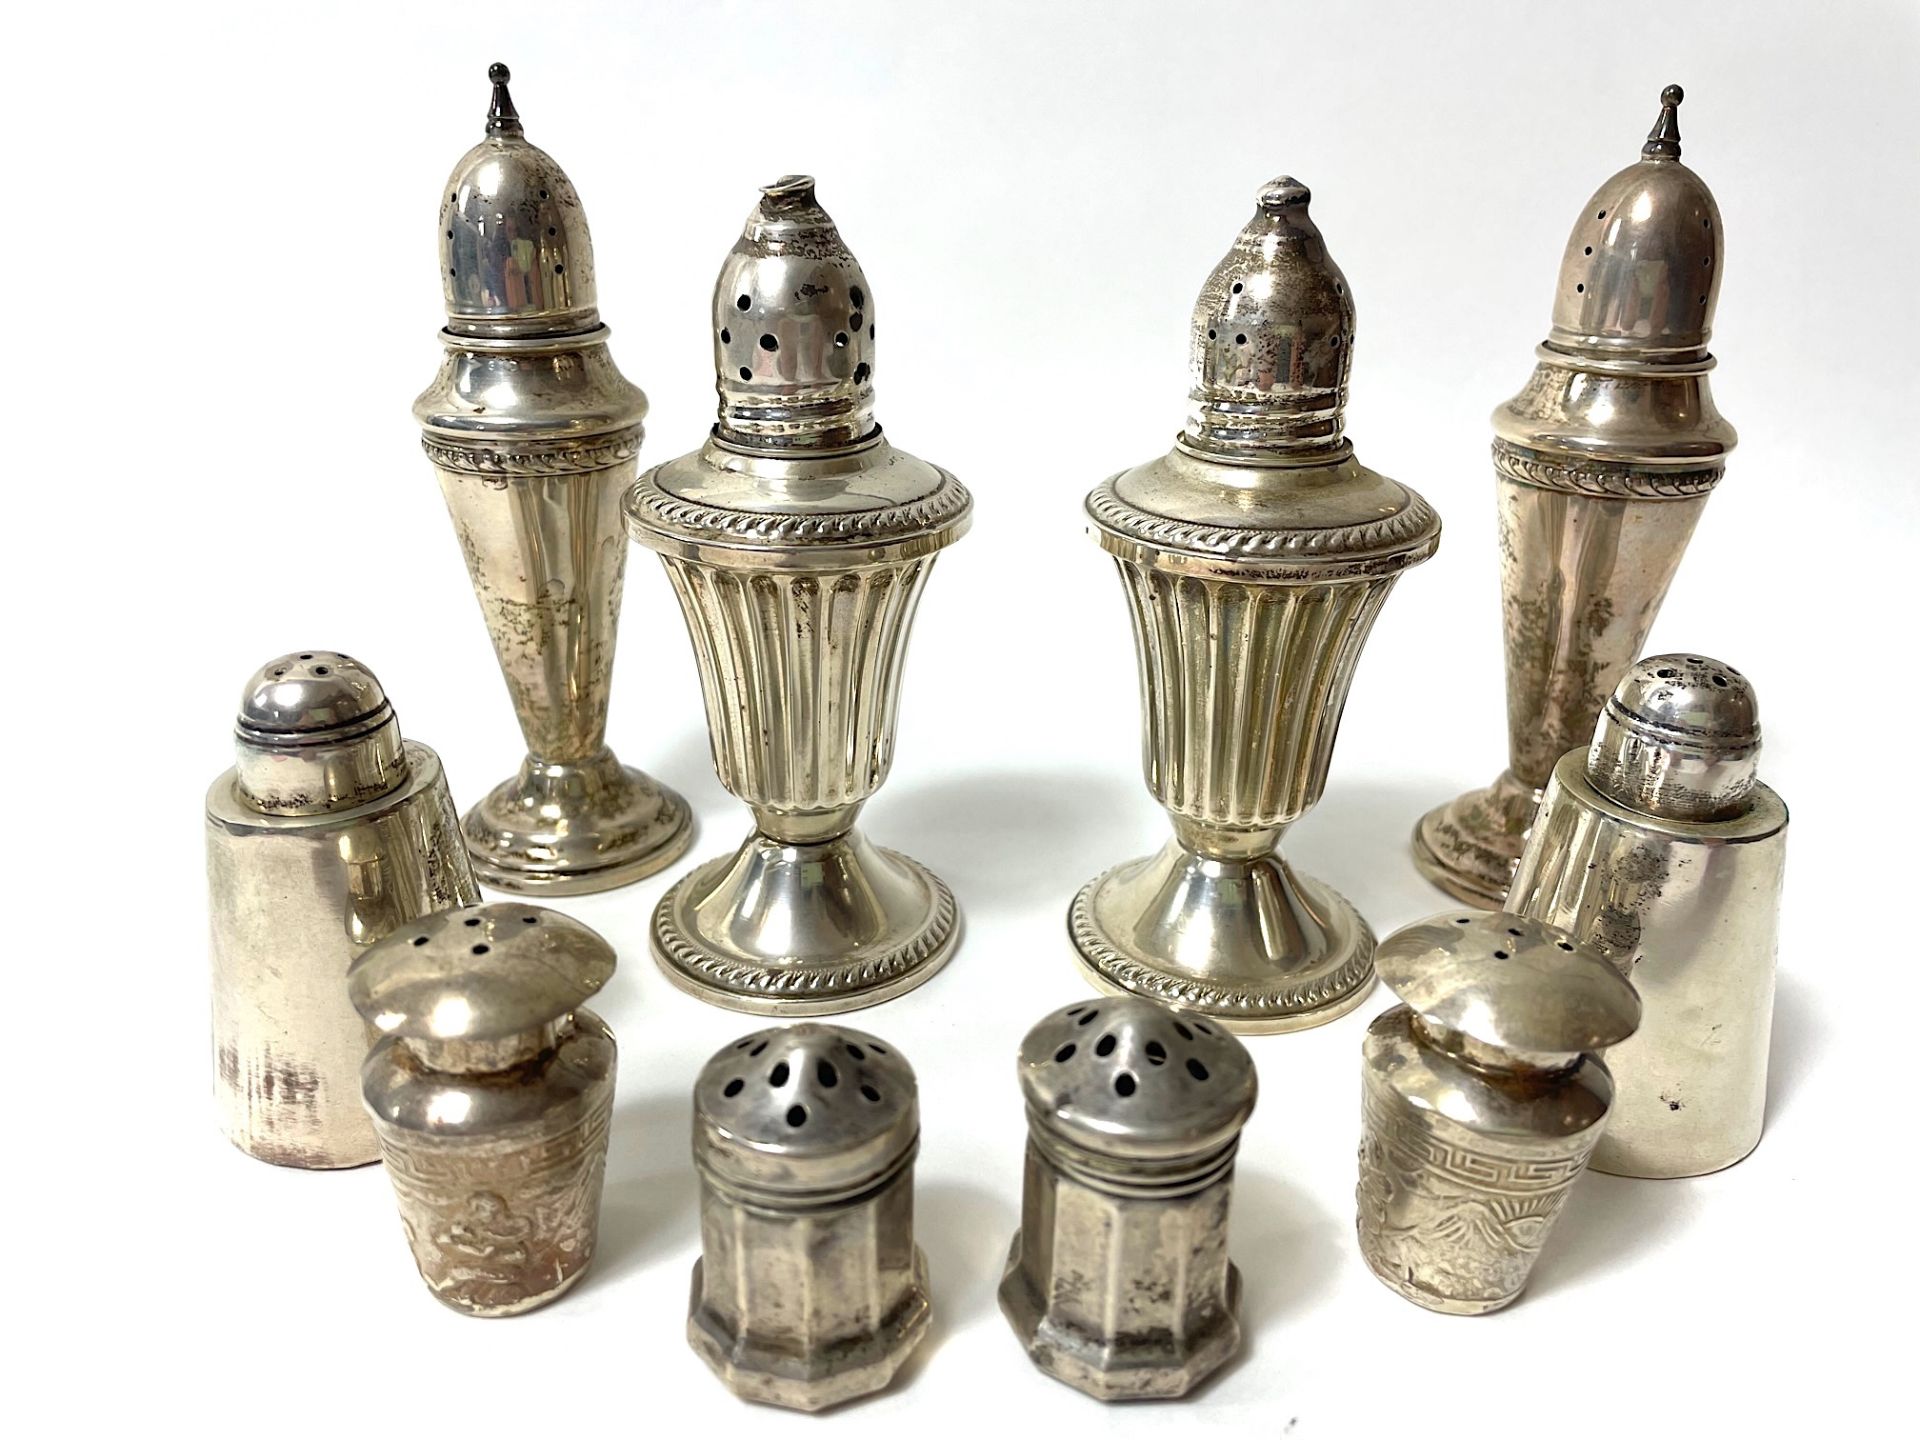 40 pairs of salt/pepper and spice shakers, - Image 29 of 88